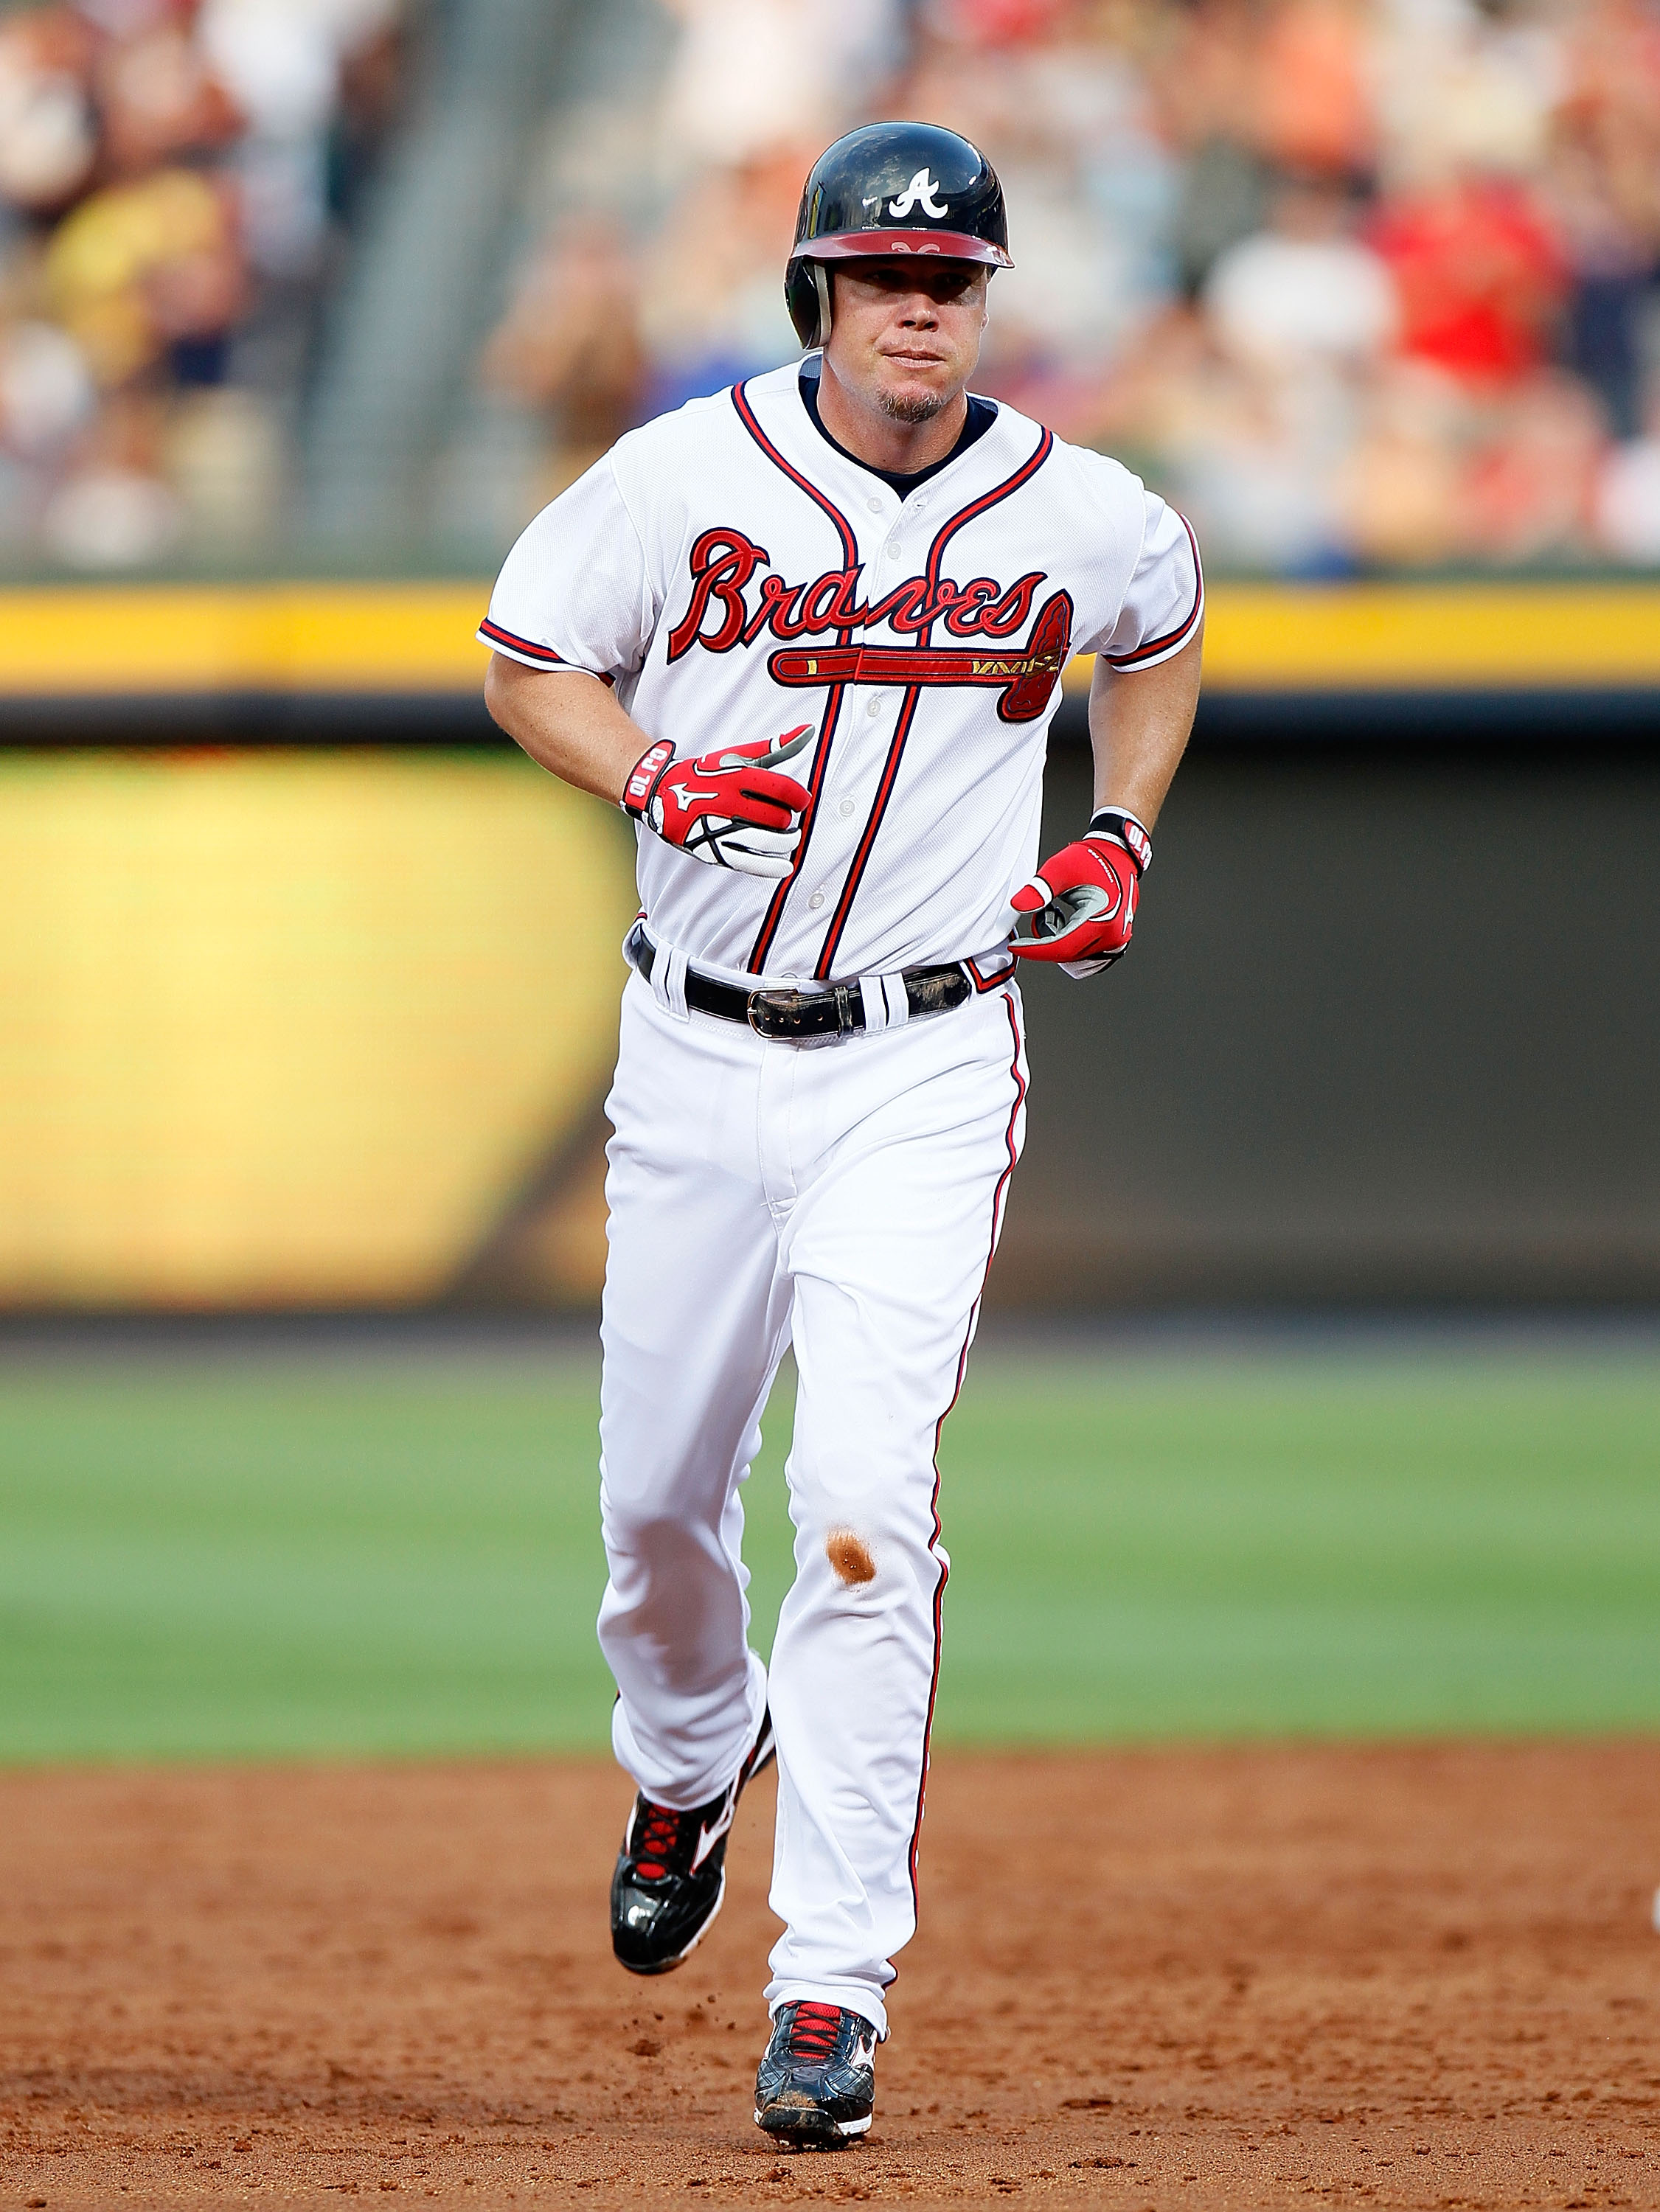 ATLANTA - JULY 15:  Chipper Jones #10 of the Atlanta Braves trotts to third base after hitting a solo homer in the third inning against the Milwaukee Brewers at Turner Field on July 15, 2010 in Atlanta, Georgia.  (Photo by Kevin C. Cox/Getty Images)